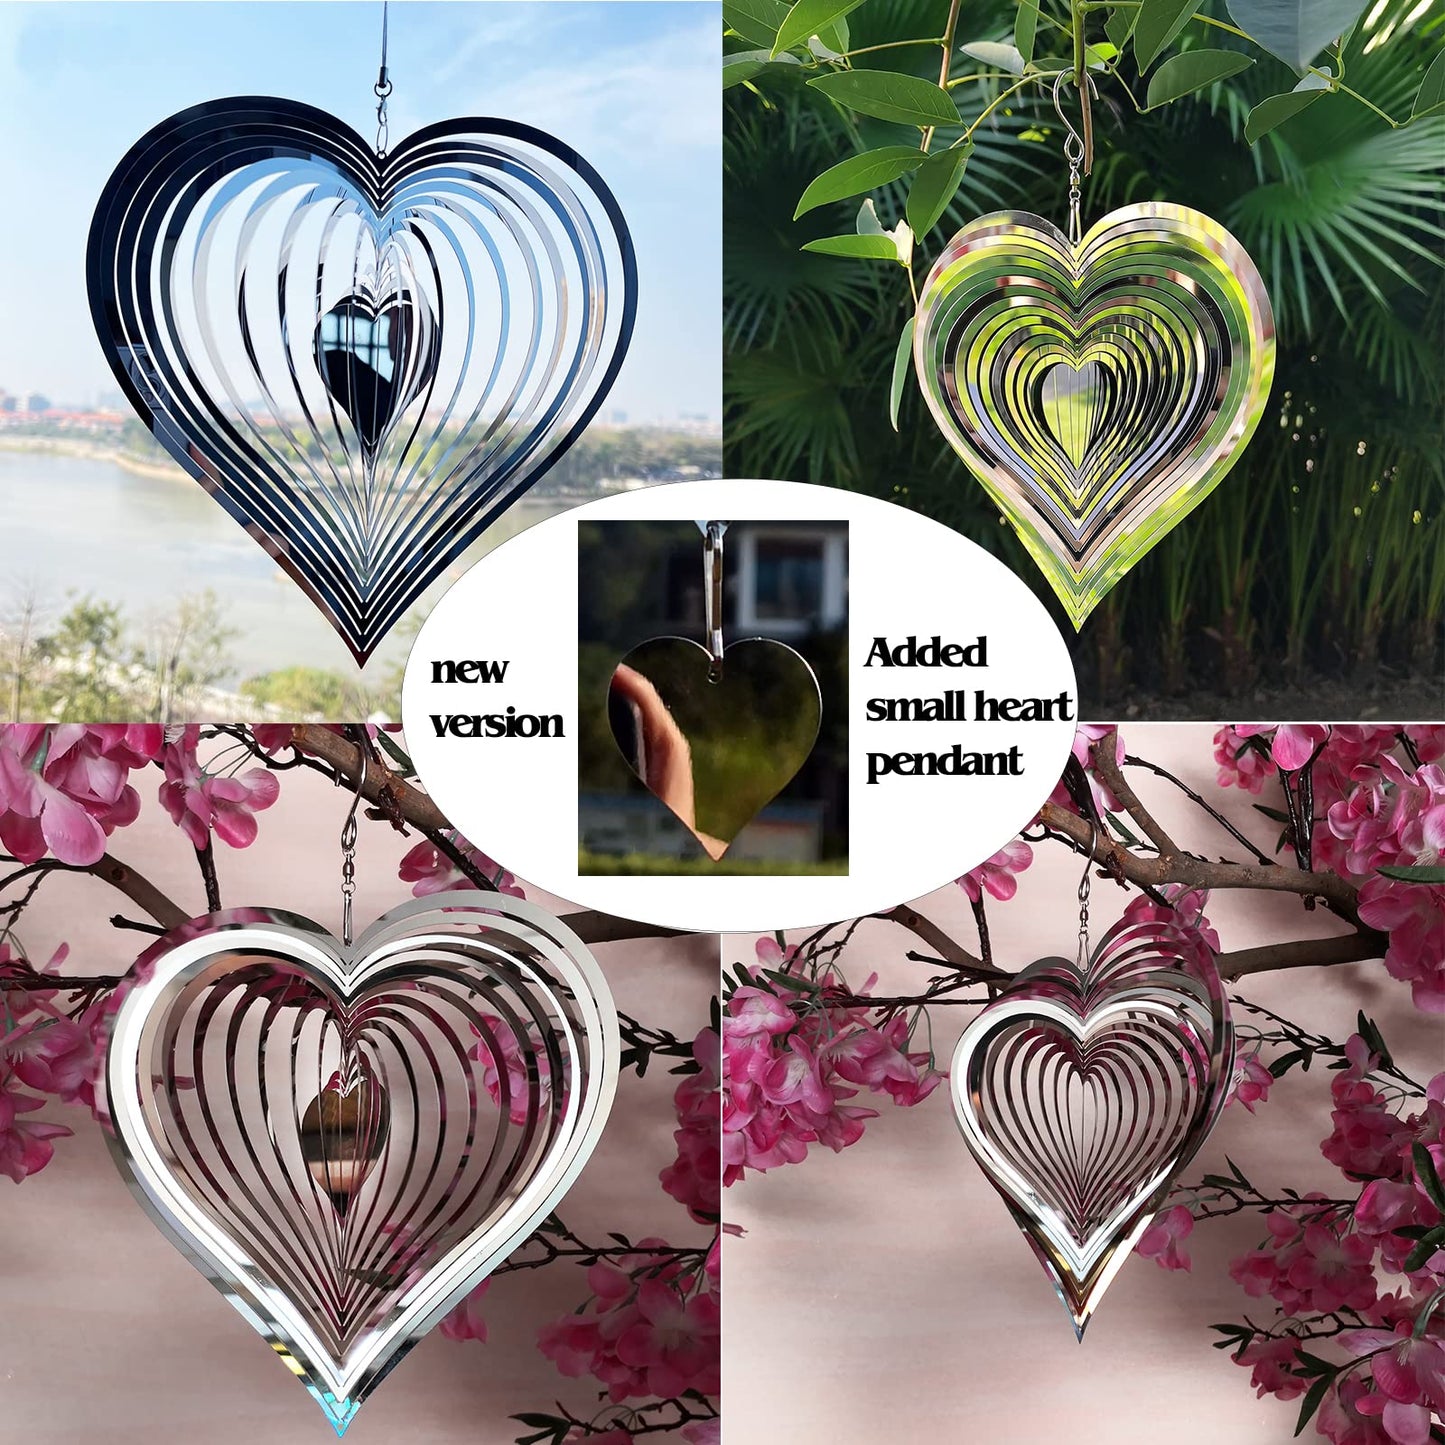 DJUAN Stainless Steel Reflective Wind Spinners Outdoor Garden Decor,Sparkly Wind Spinner Bird Devices Deterrent to Scare Birds Away from Yard Patio Farm,Metal Heart Wind Spinners Gifts for Mom, Women